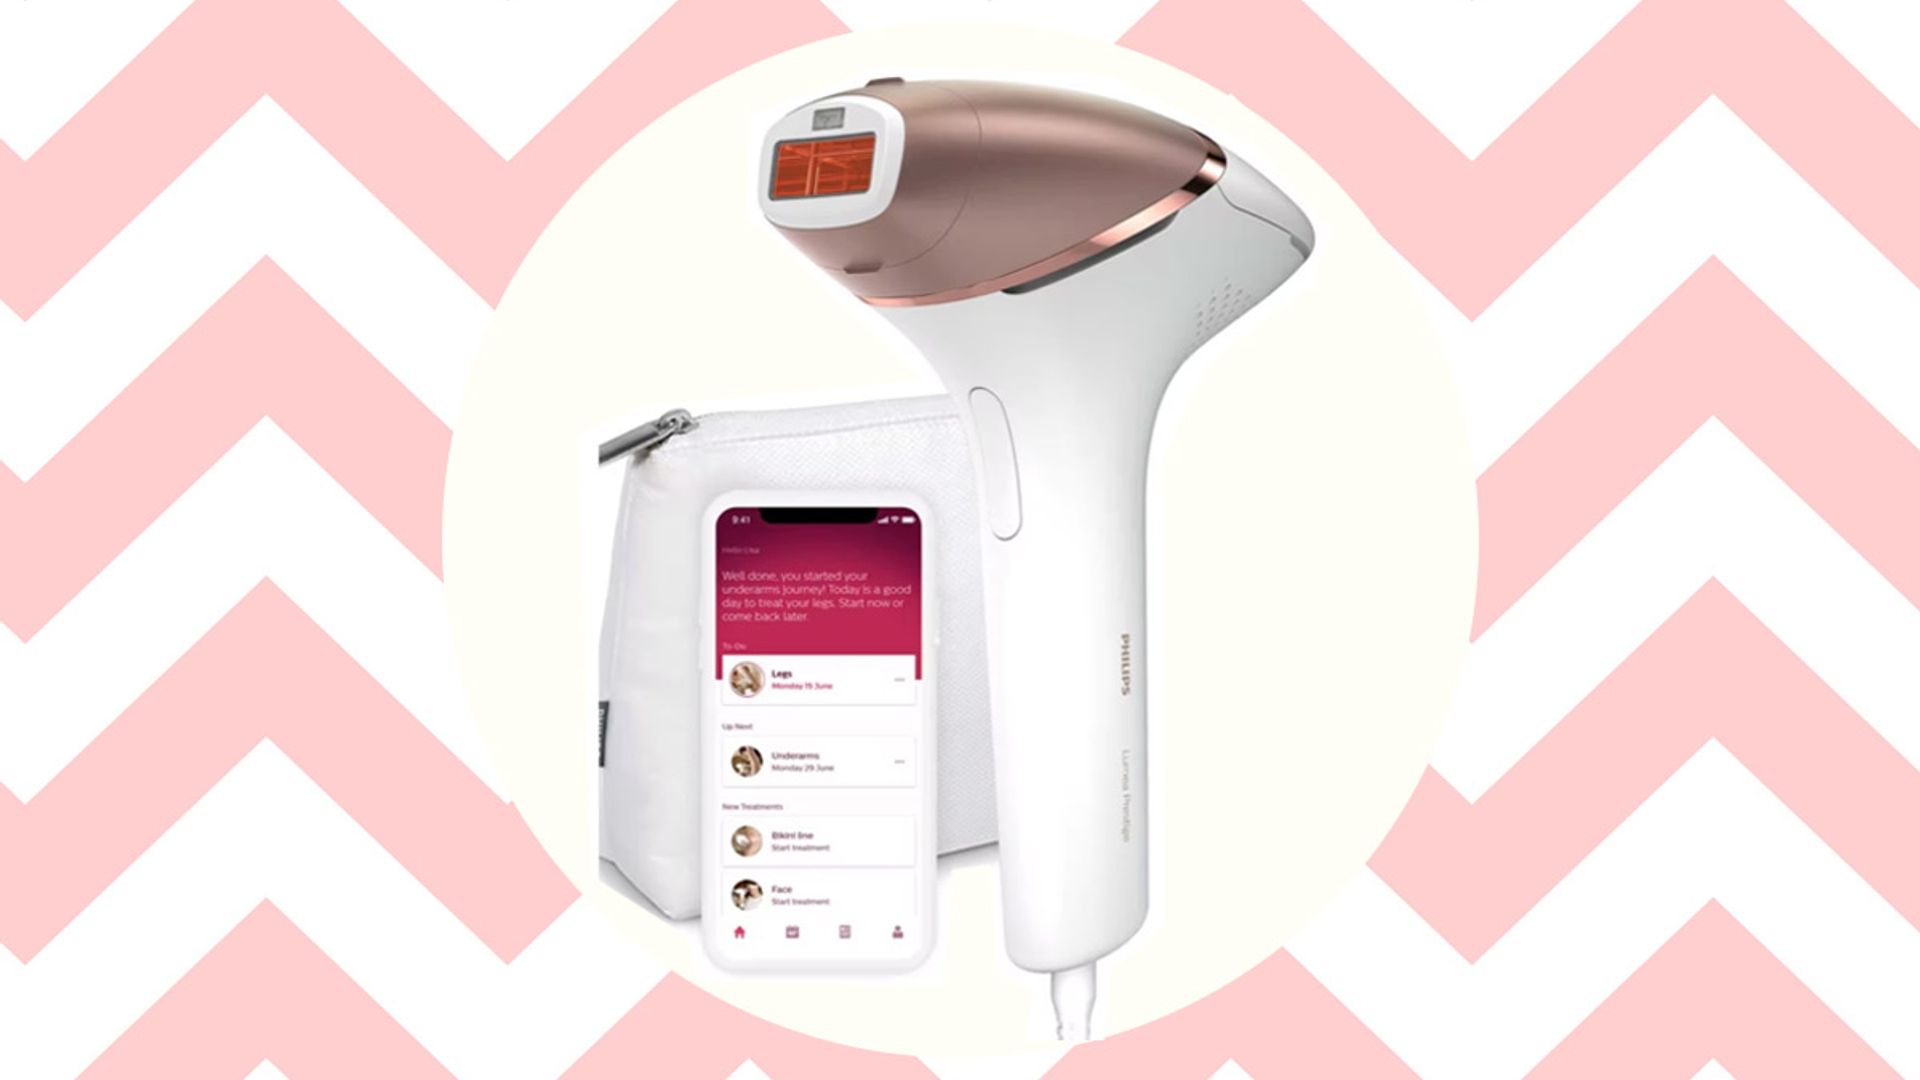 5 ways the Philips Lumea IPL can save you hours of beauty admin